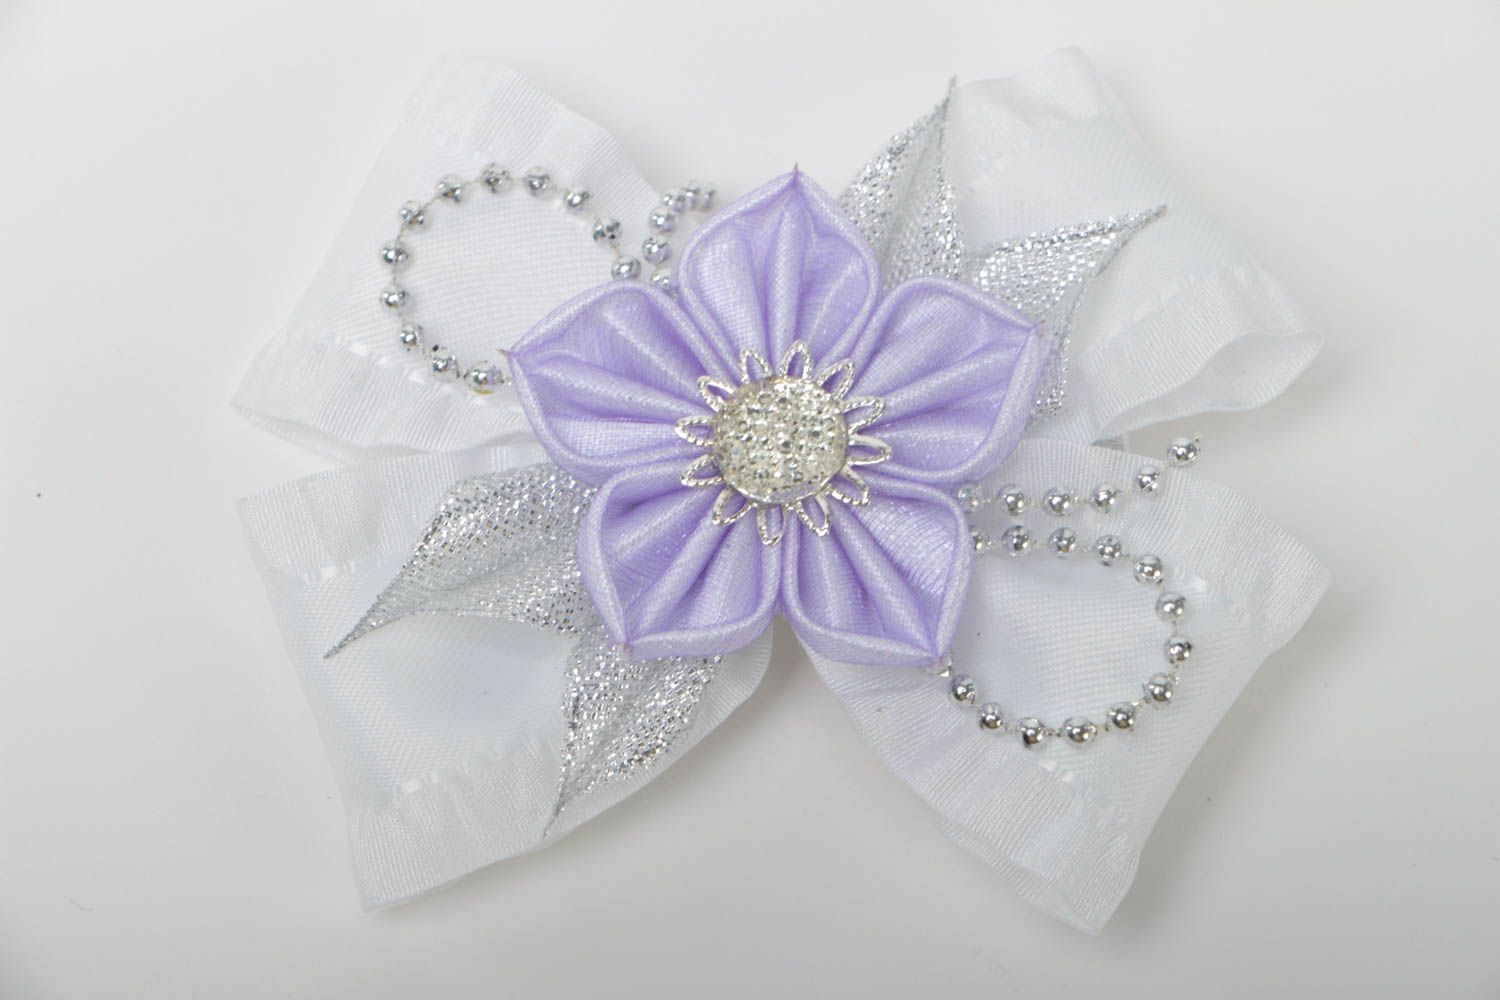 Beautiful handcrafted flower barrette textile flower hair clip gifts for her photo 2